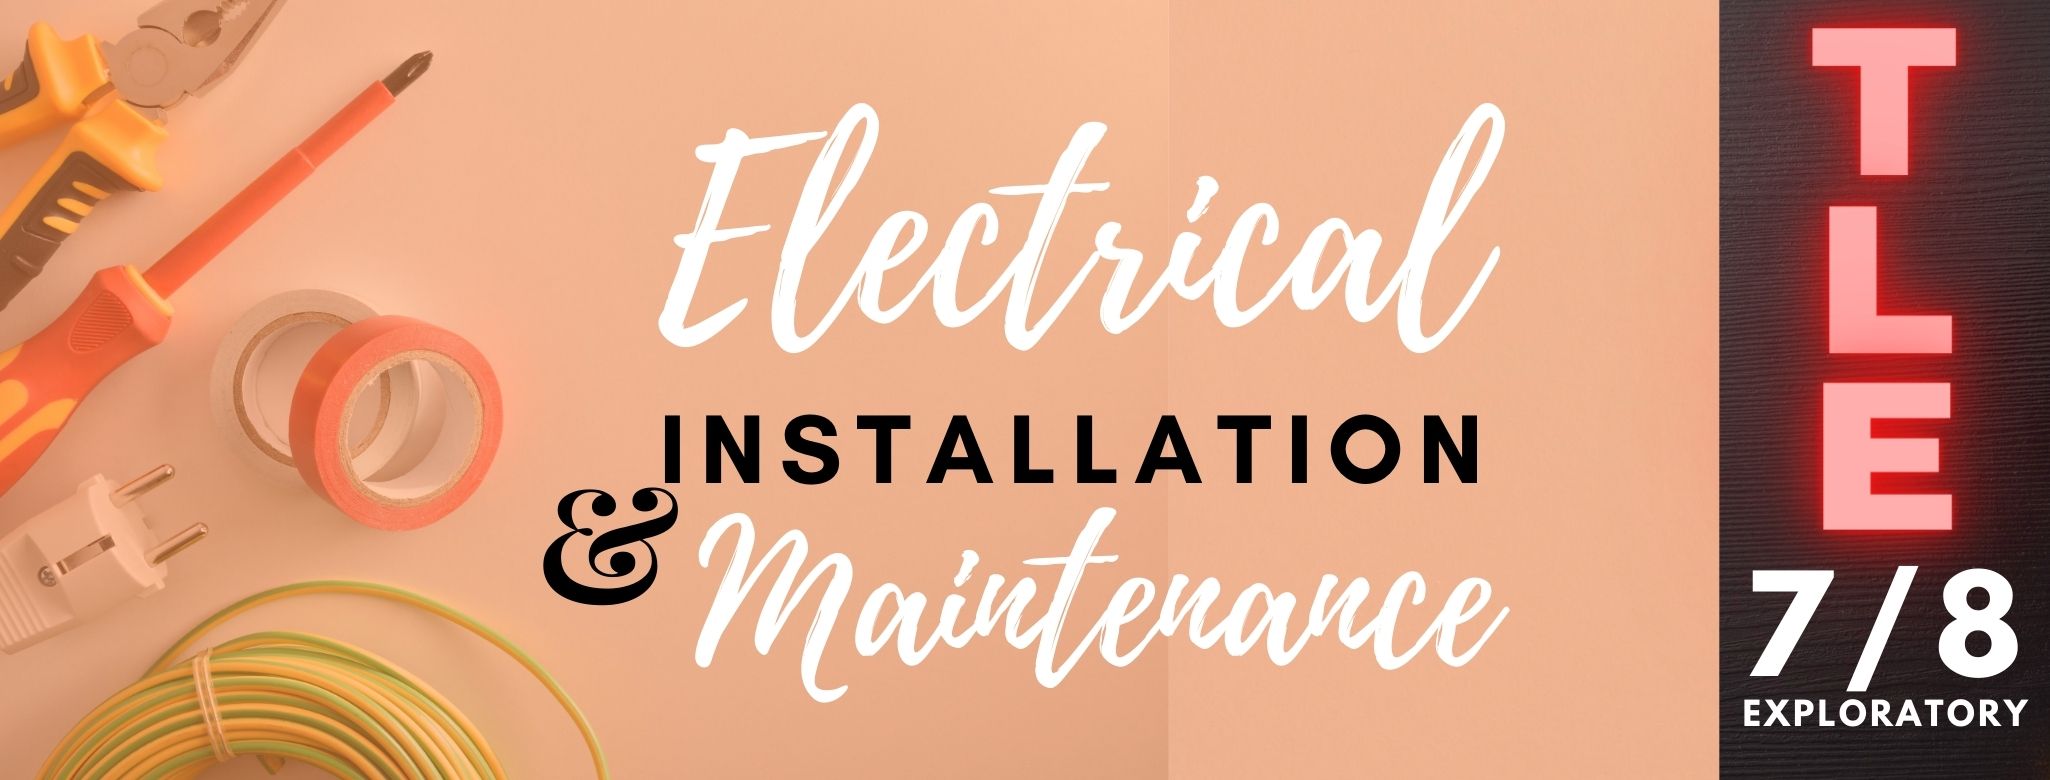 TLE - Electrical Installation and Maintenance copy 2